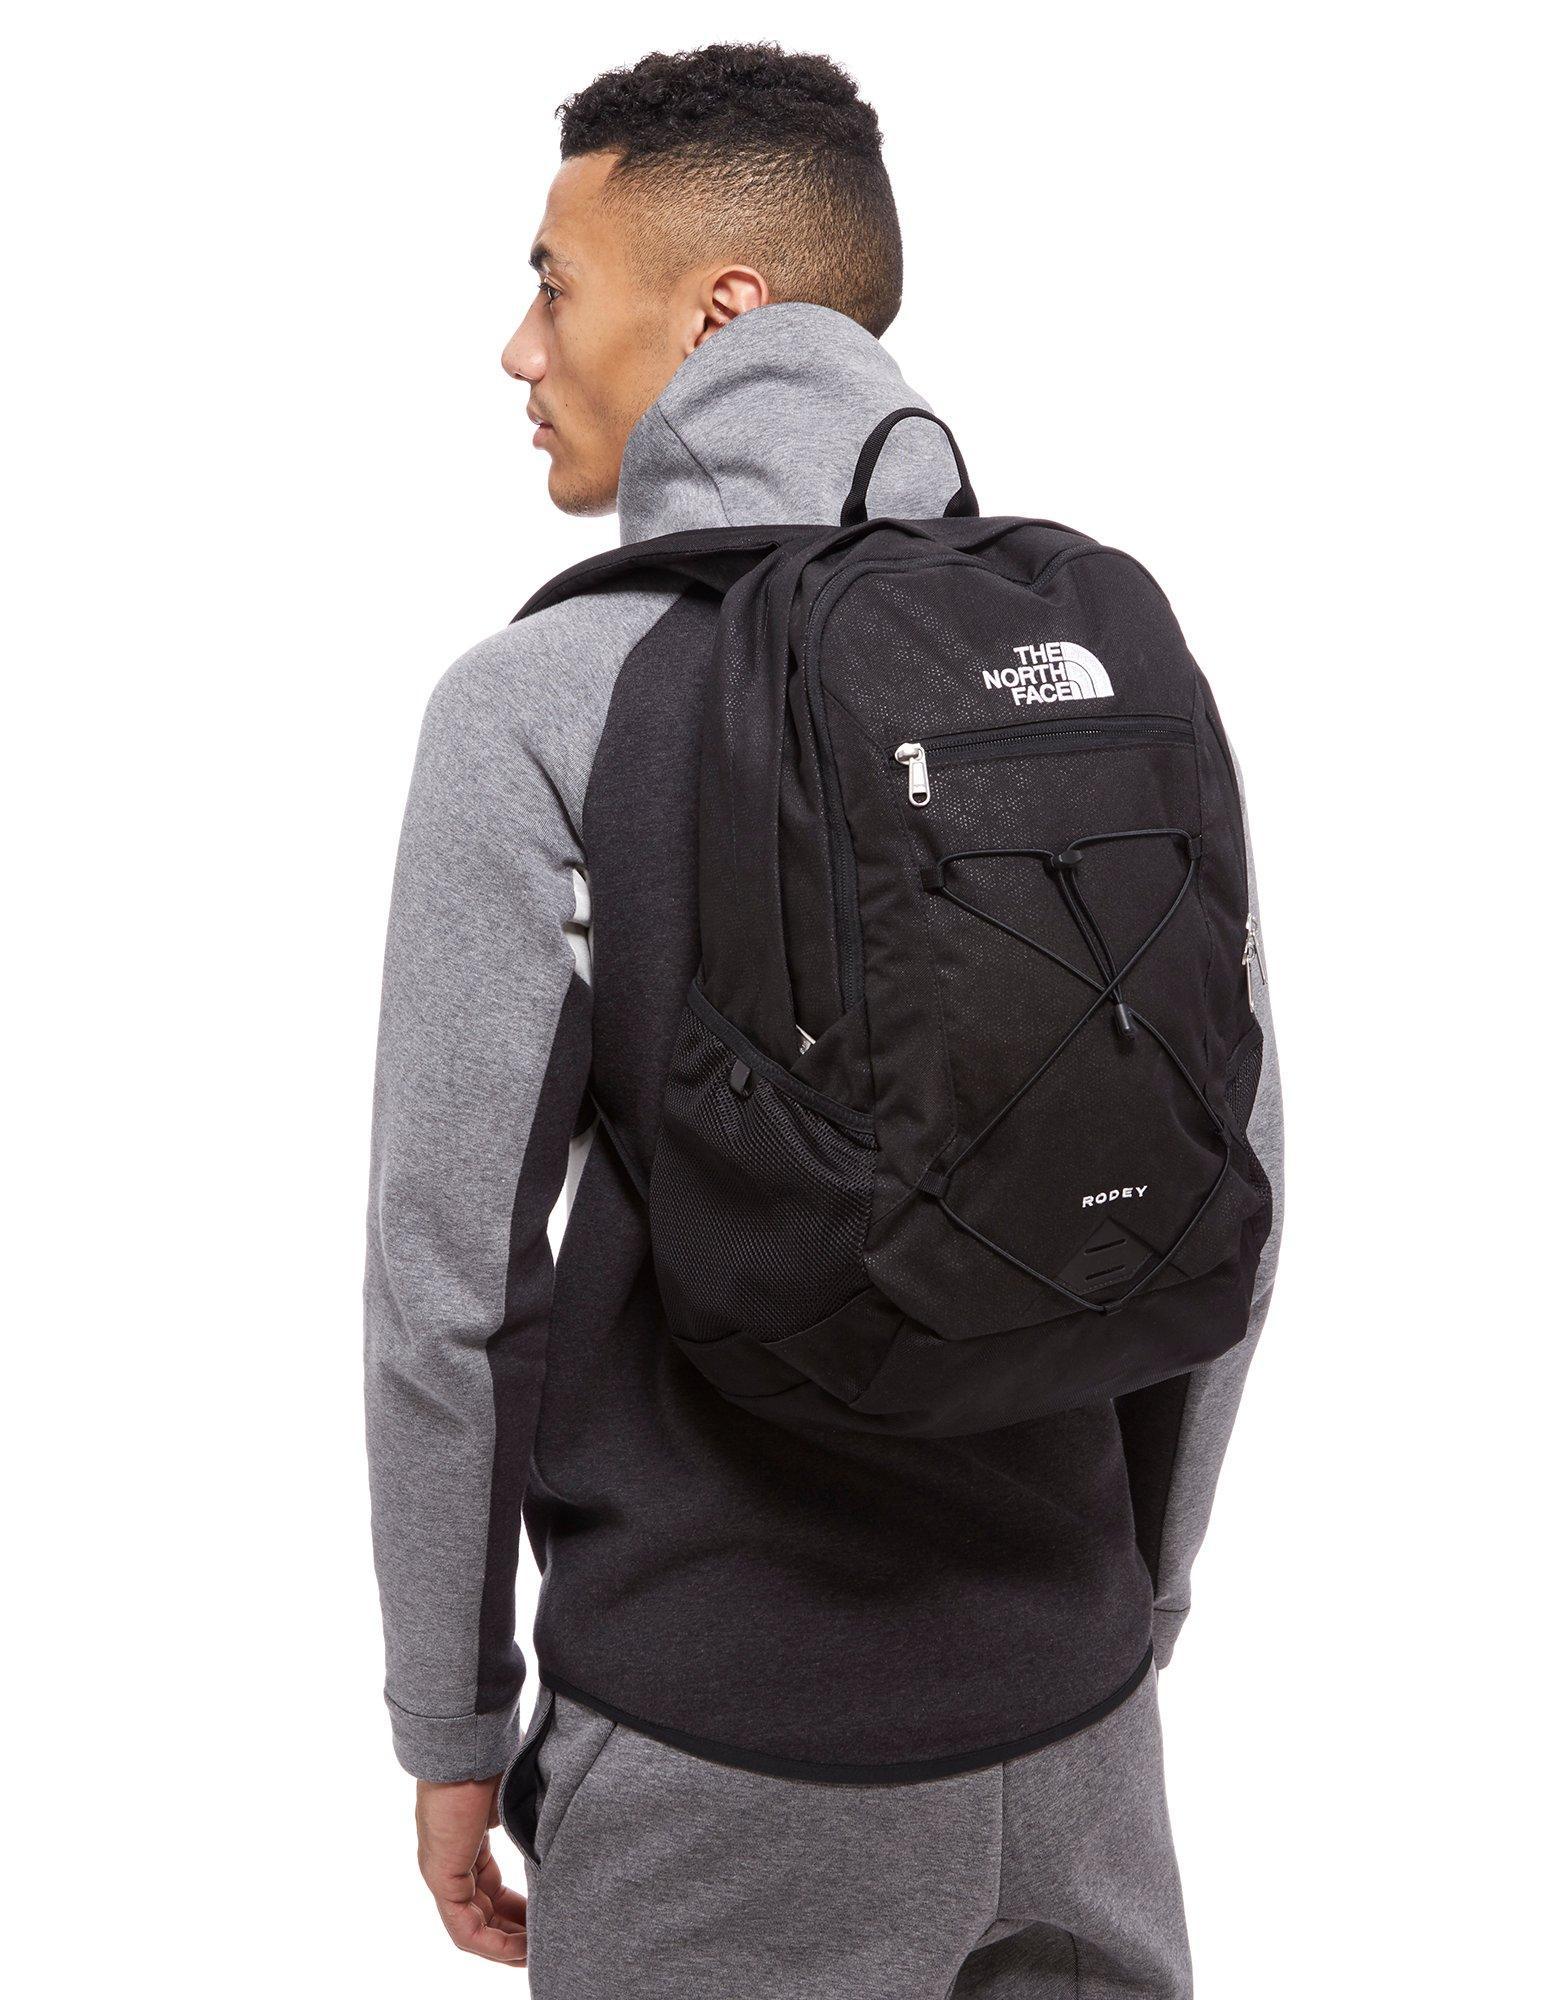 the north face rodey 27l